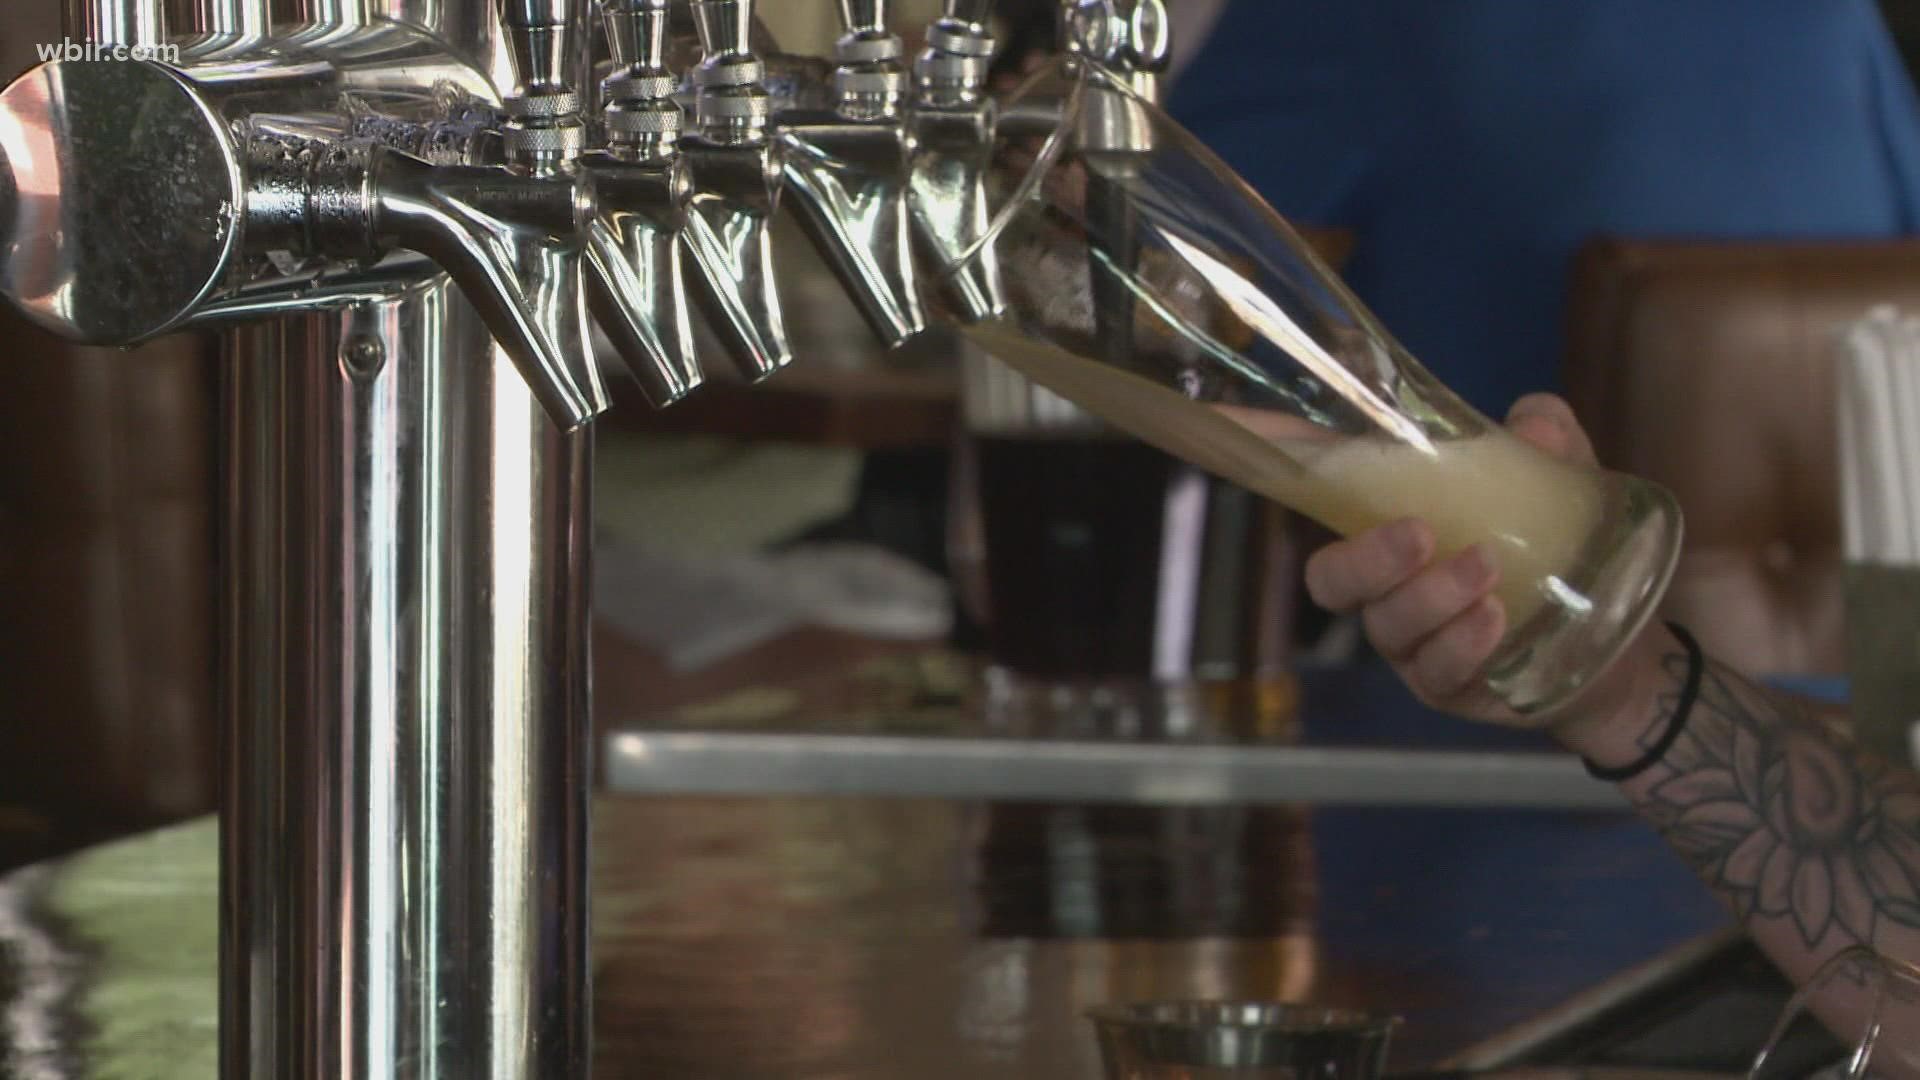 A food hall in downtown Knoxville has been approved to house multiple beer vendors as of Tuesday.